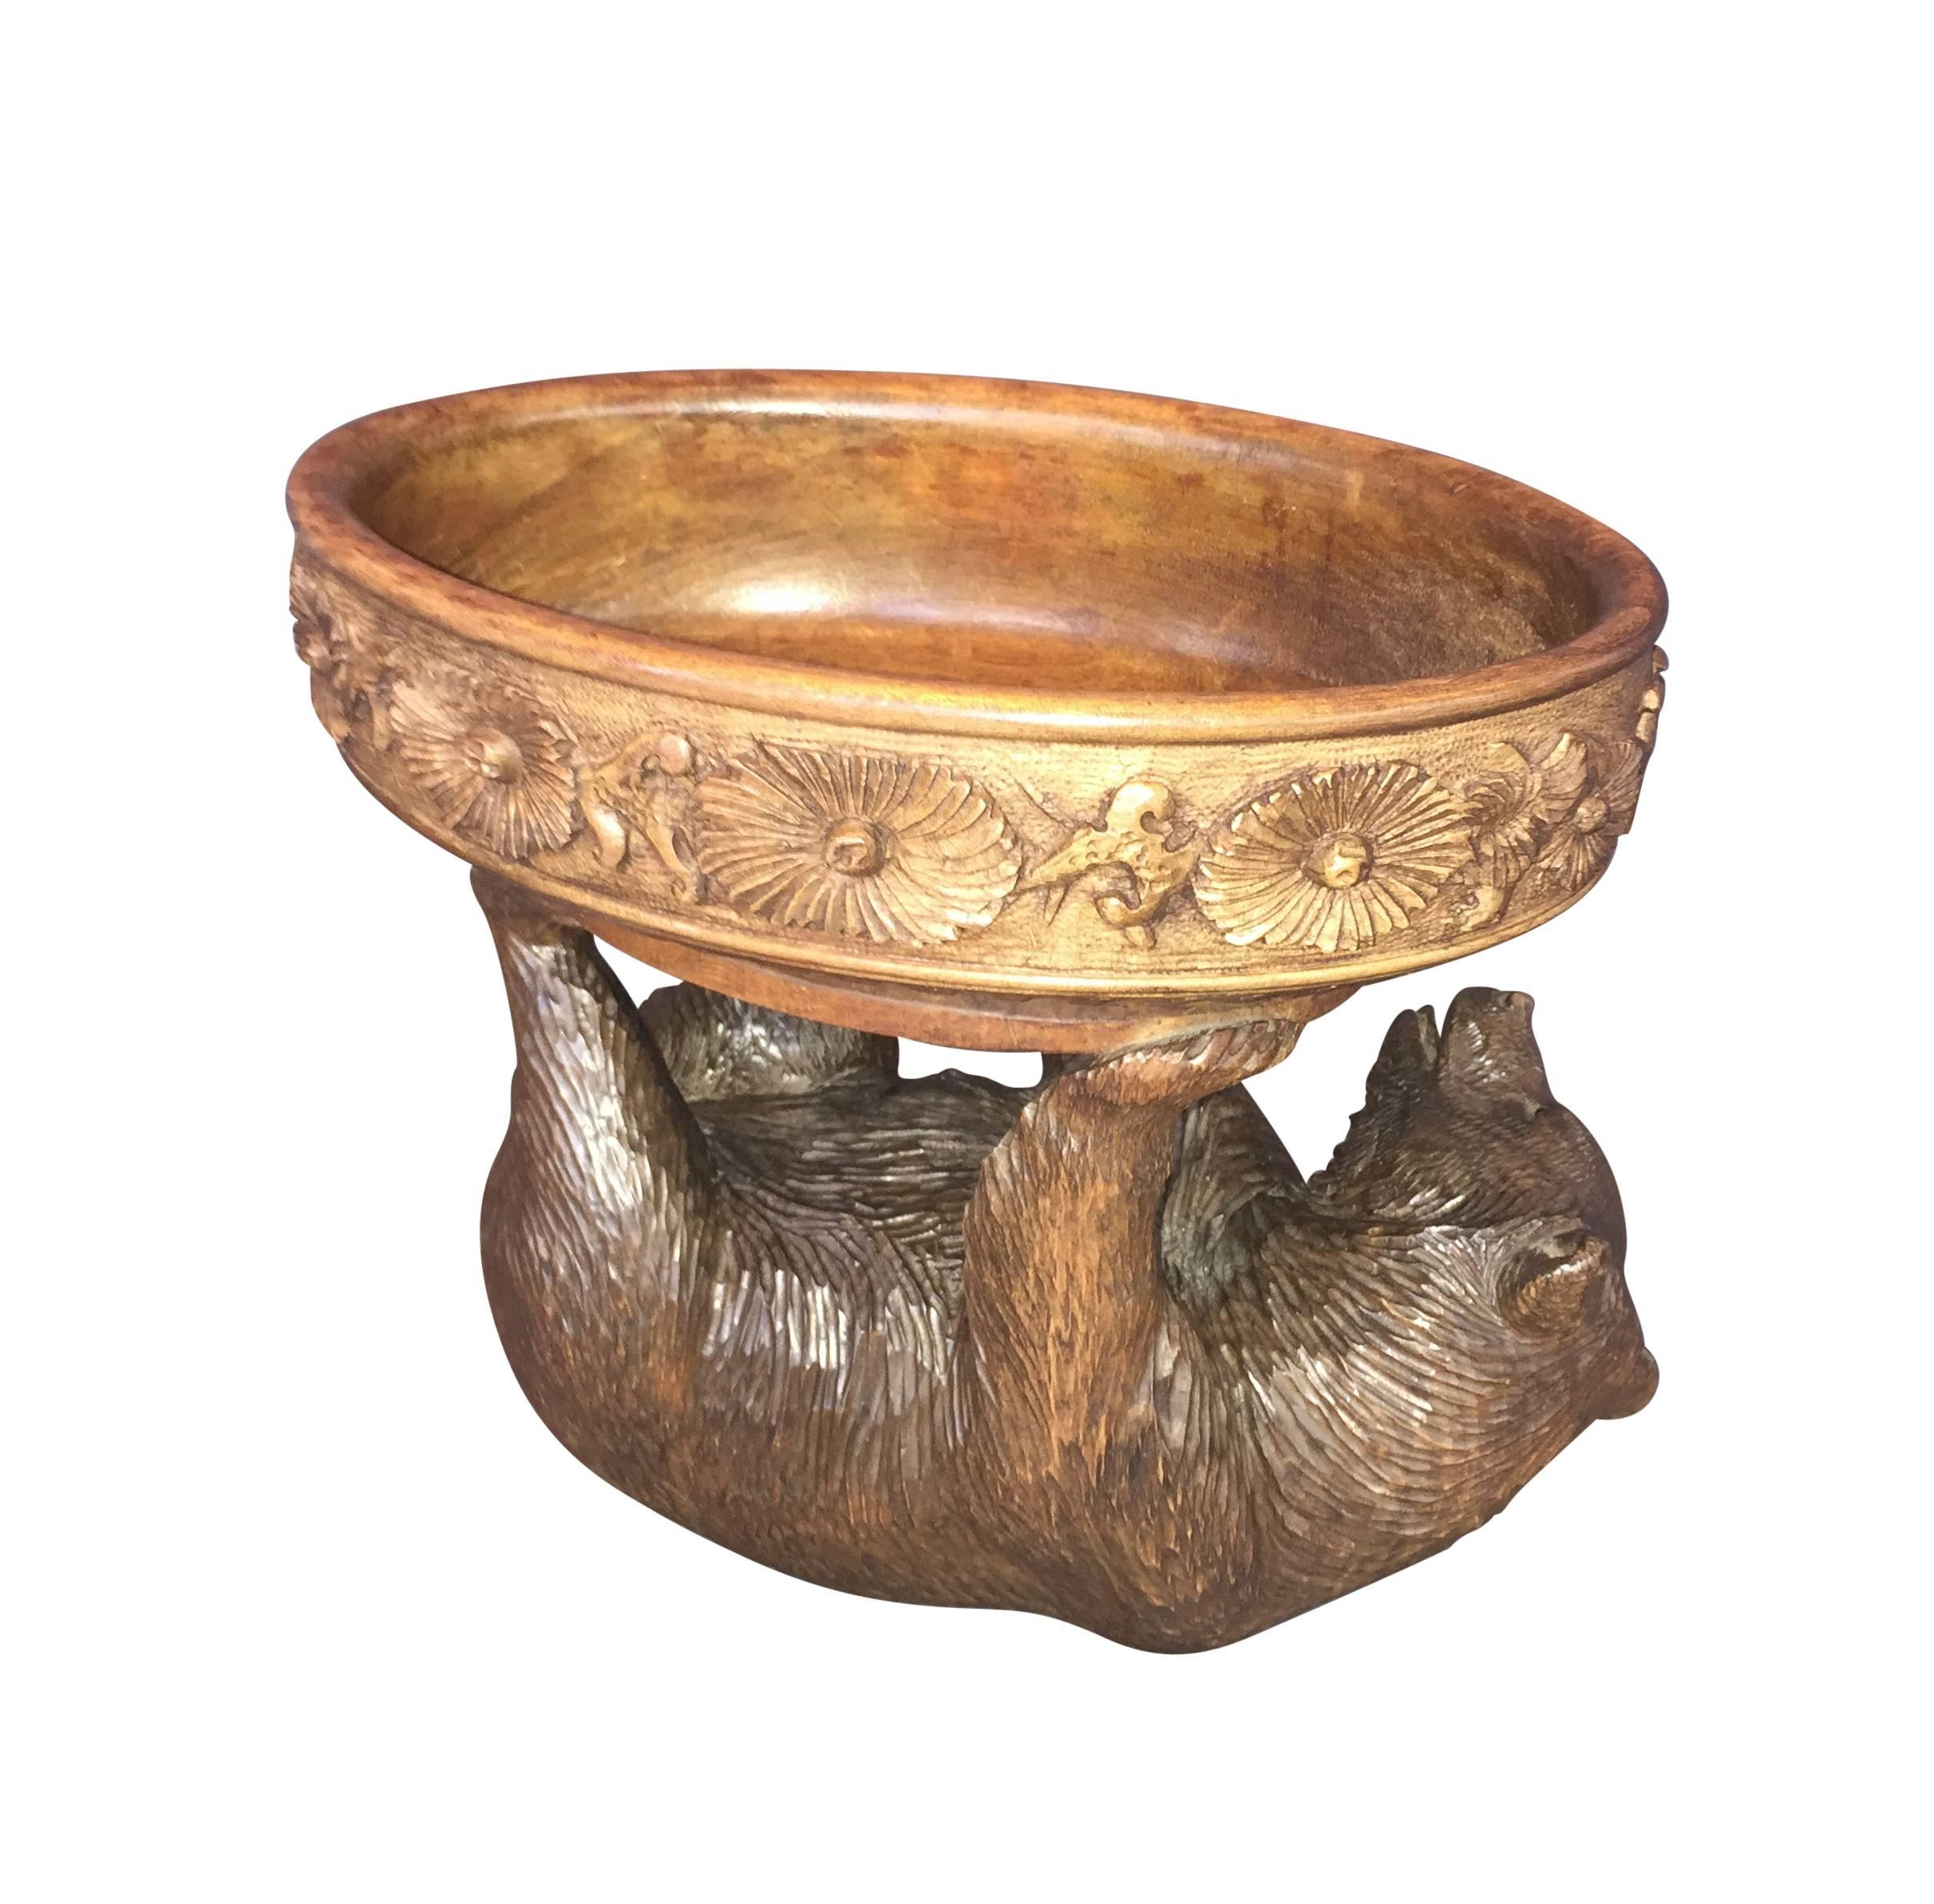 A stunning Swiss Black Forest walnut carving modeled as a bearing lying on its back. The bowl features floral motifs.